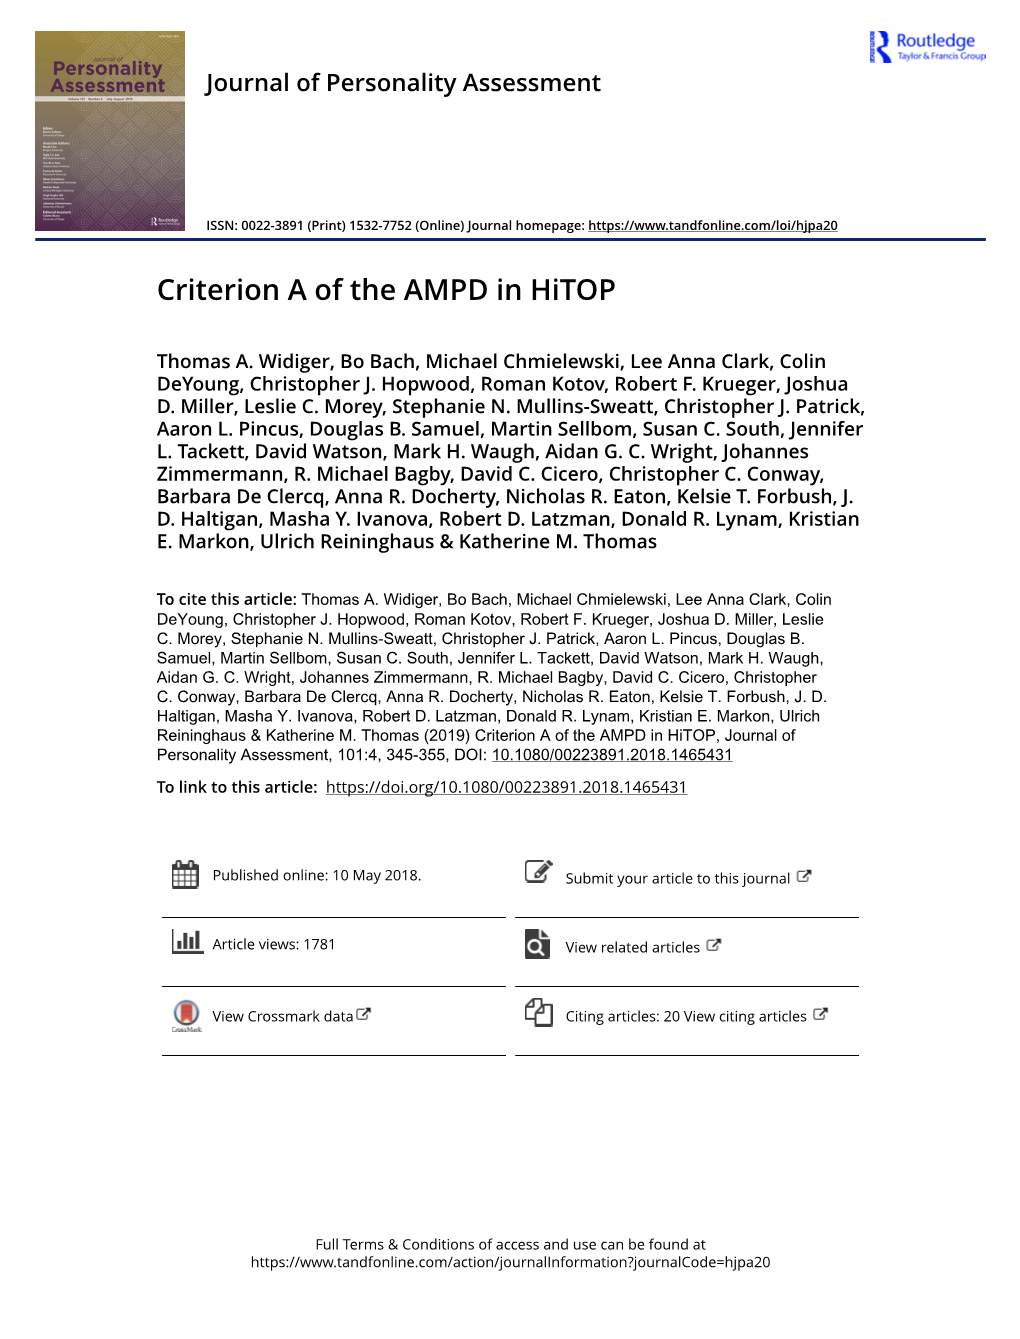 Criterion a of the AMPD in Hitop.Pdf